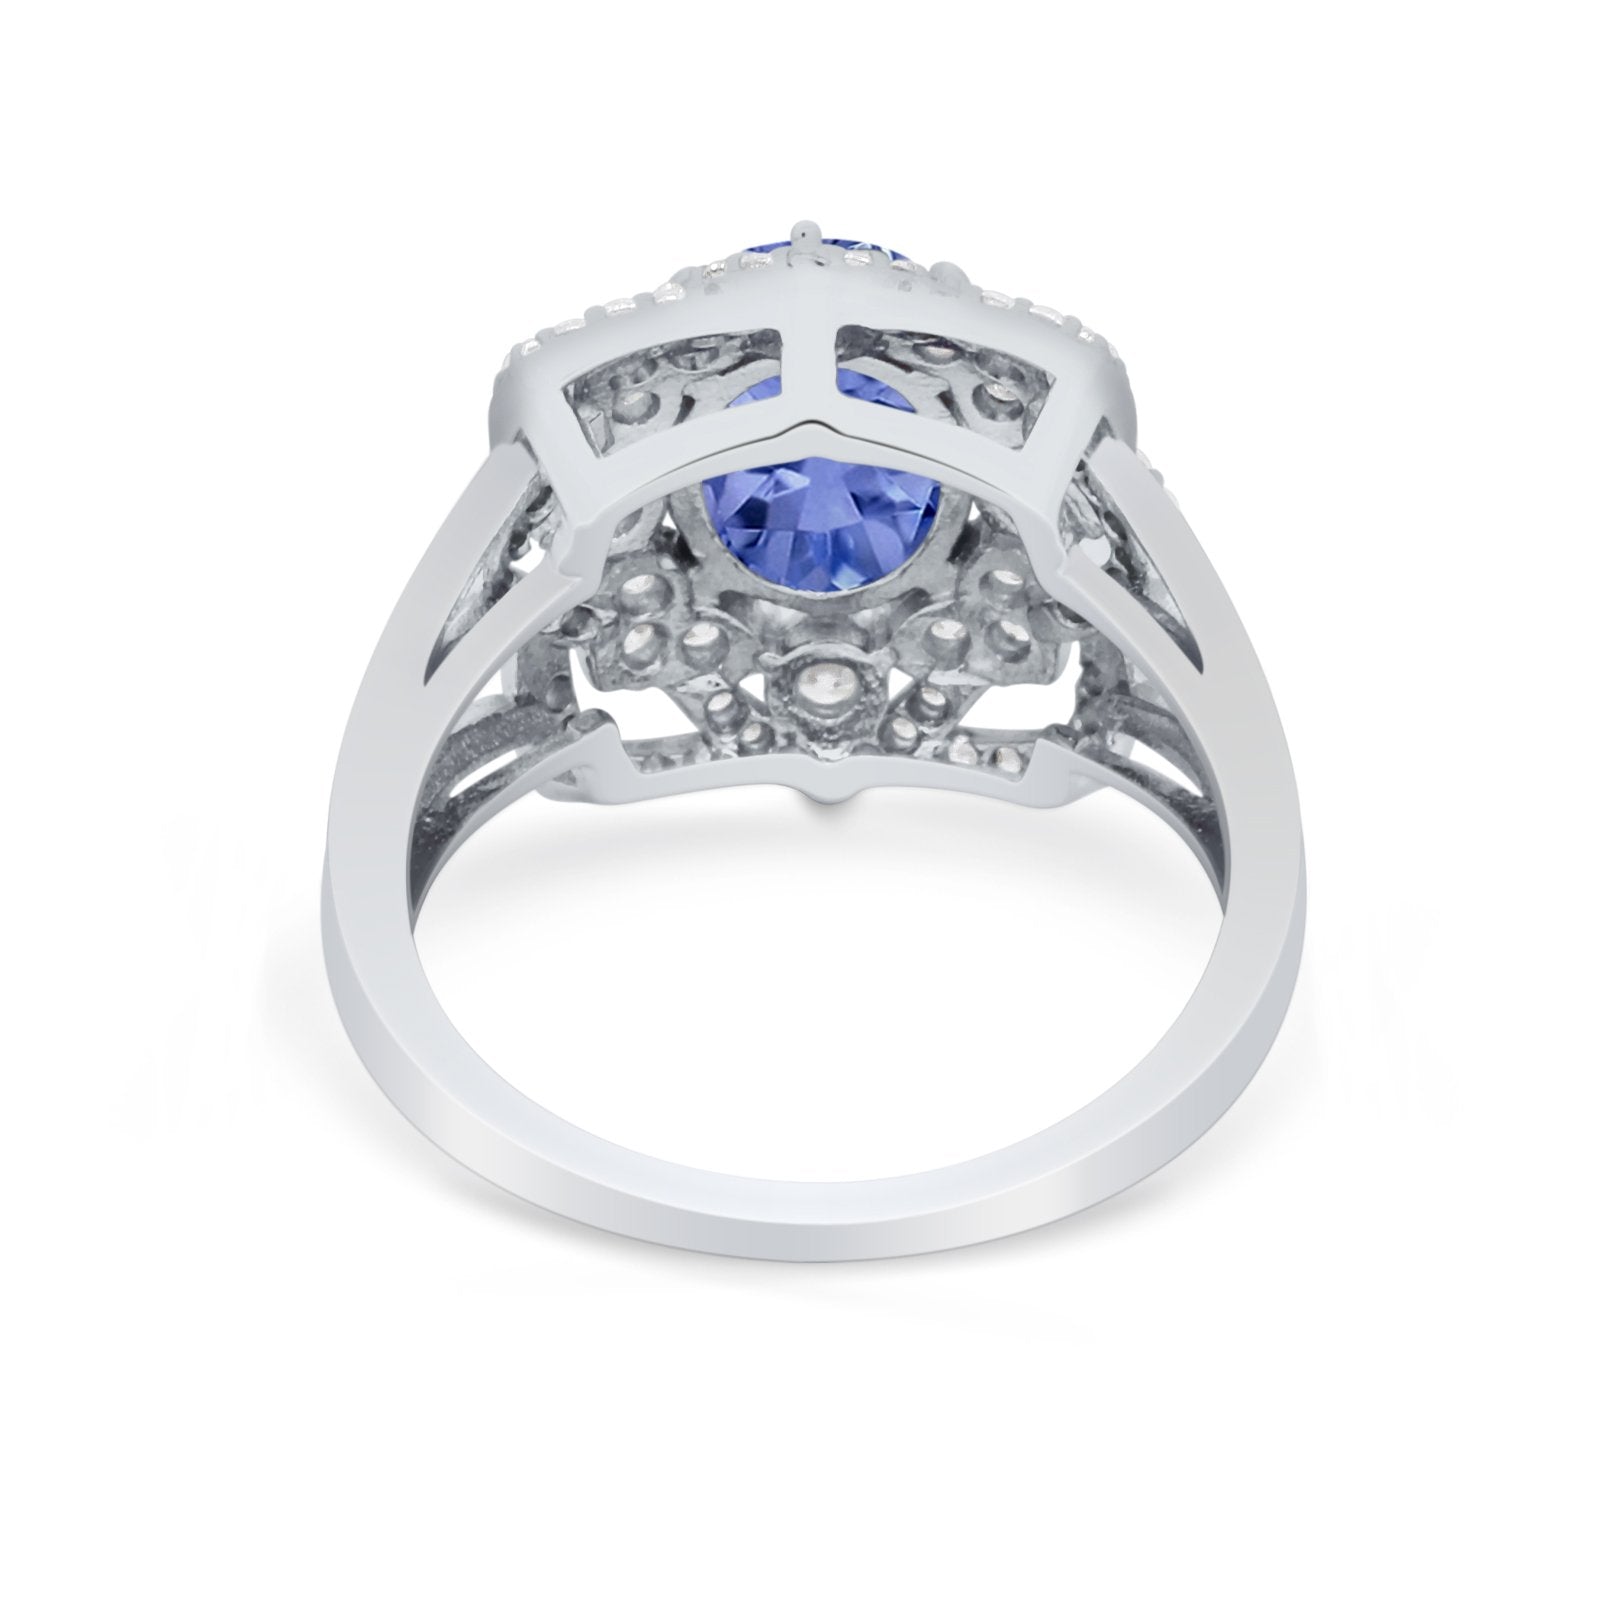 Art Deco Oval Wedding Ring Simulated Tanzanite CZ 925 Sterling Silver